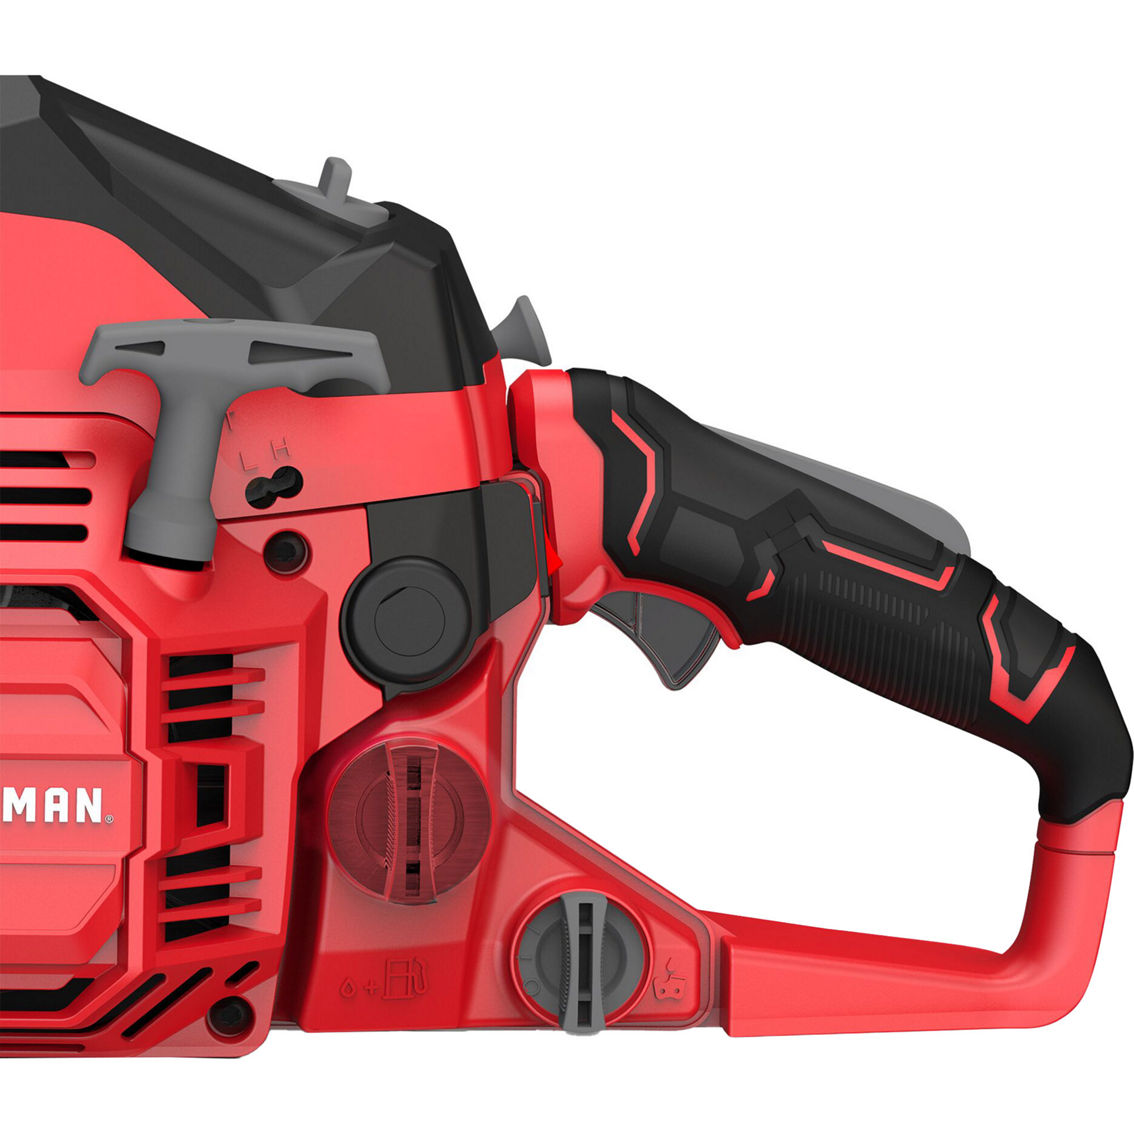 Craftsman 20-in. 46cc 2 Cycle Gas Chainsaw - Image 4 of 6